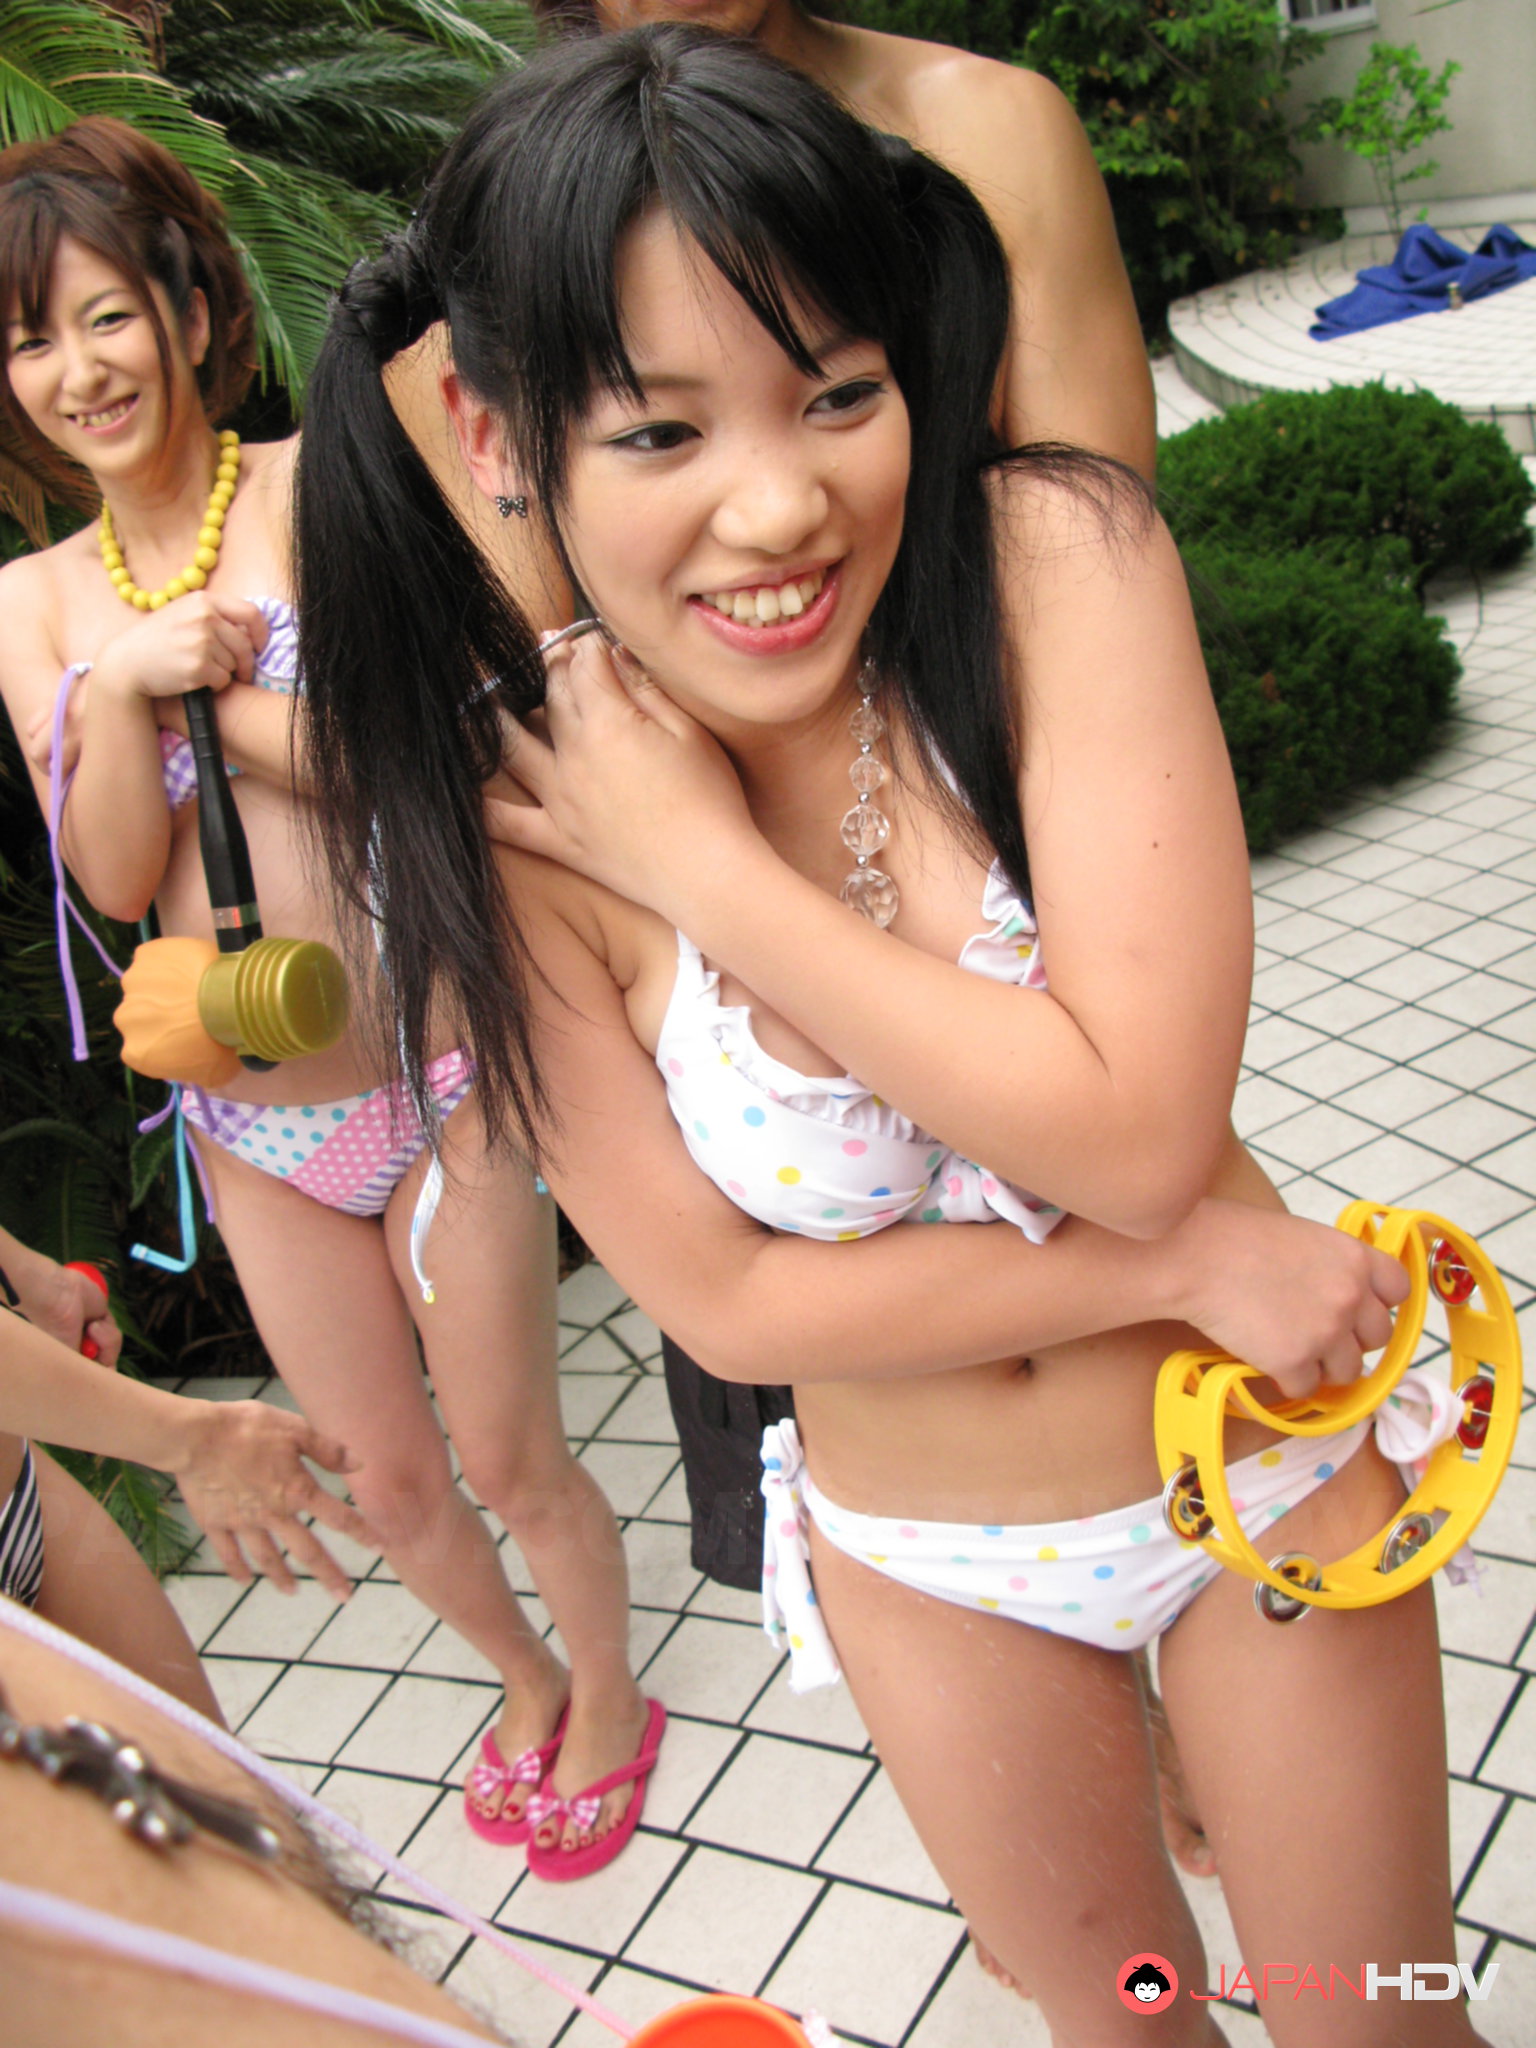 Pool Side Party - Japanese girls enjoy in some sexy pool party